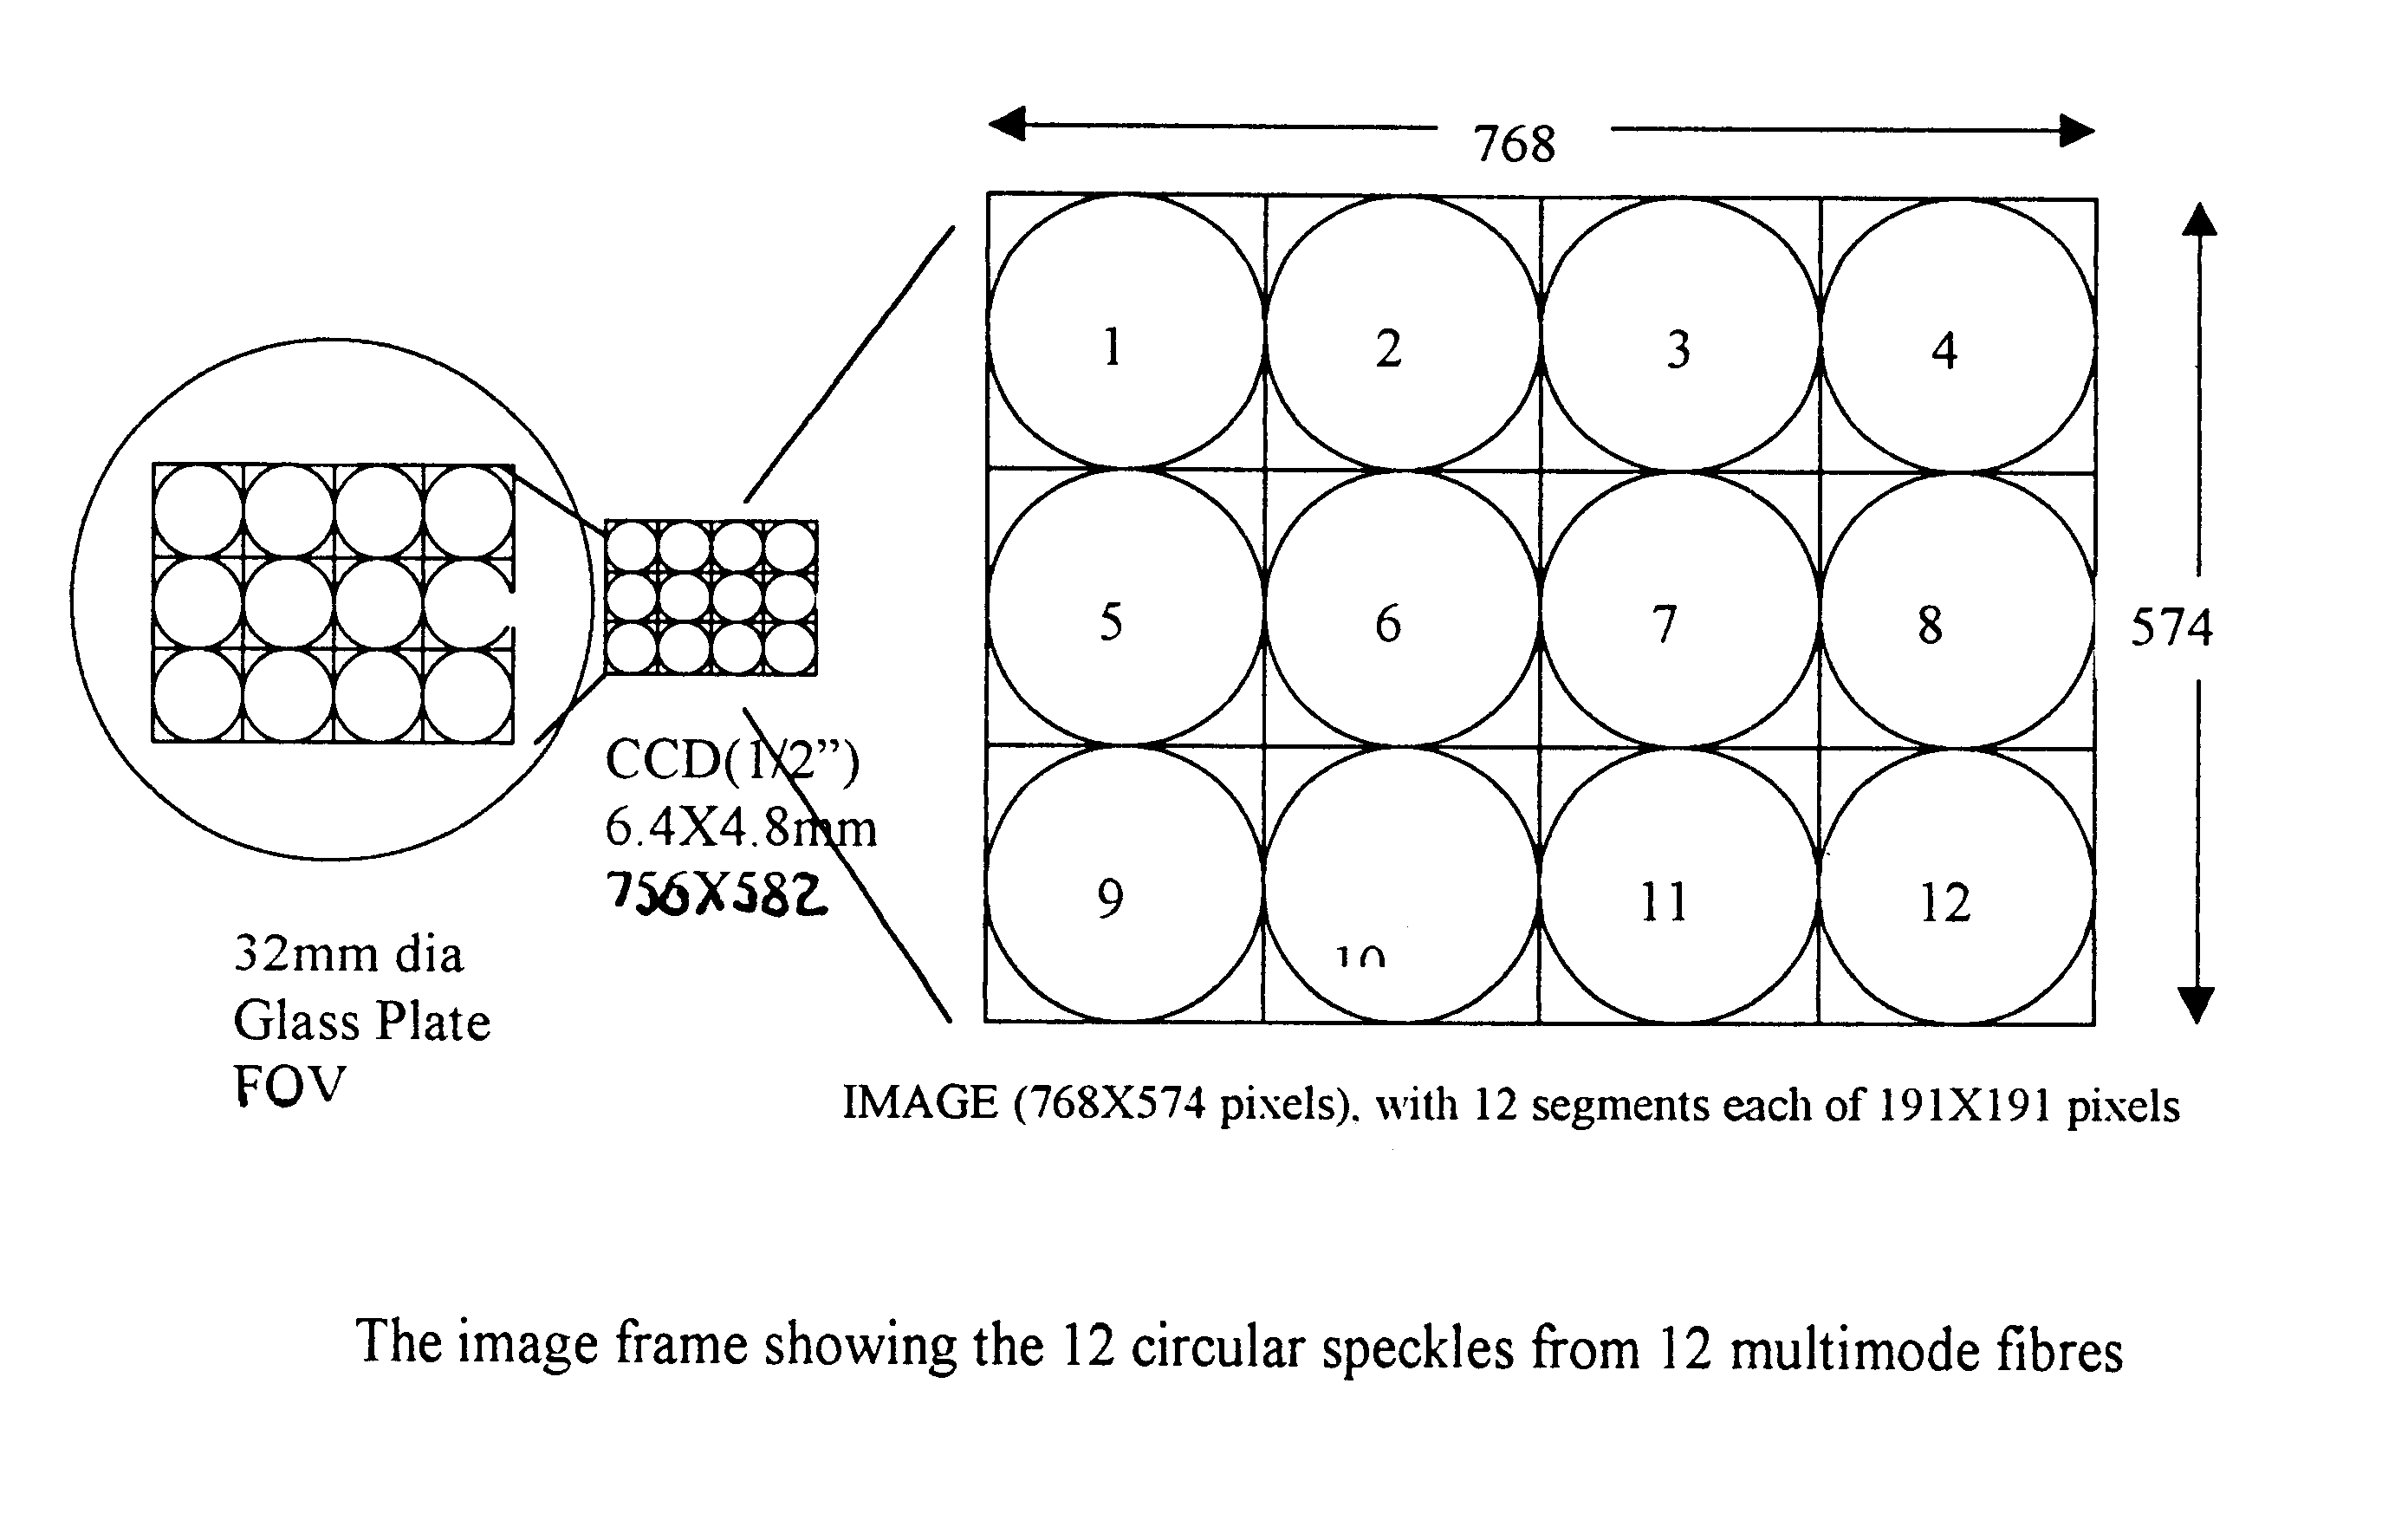 Multi-fiber optic 2D-array device for sensing and localizing environment perturbation using speckle image processing